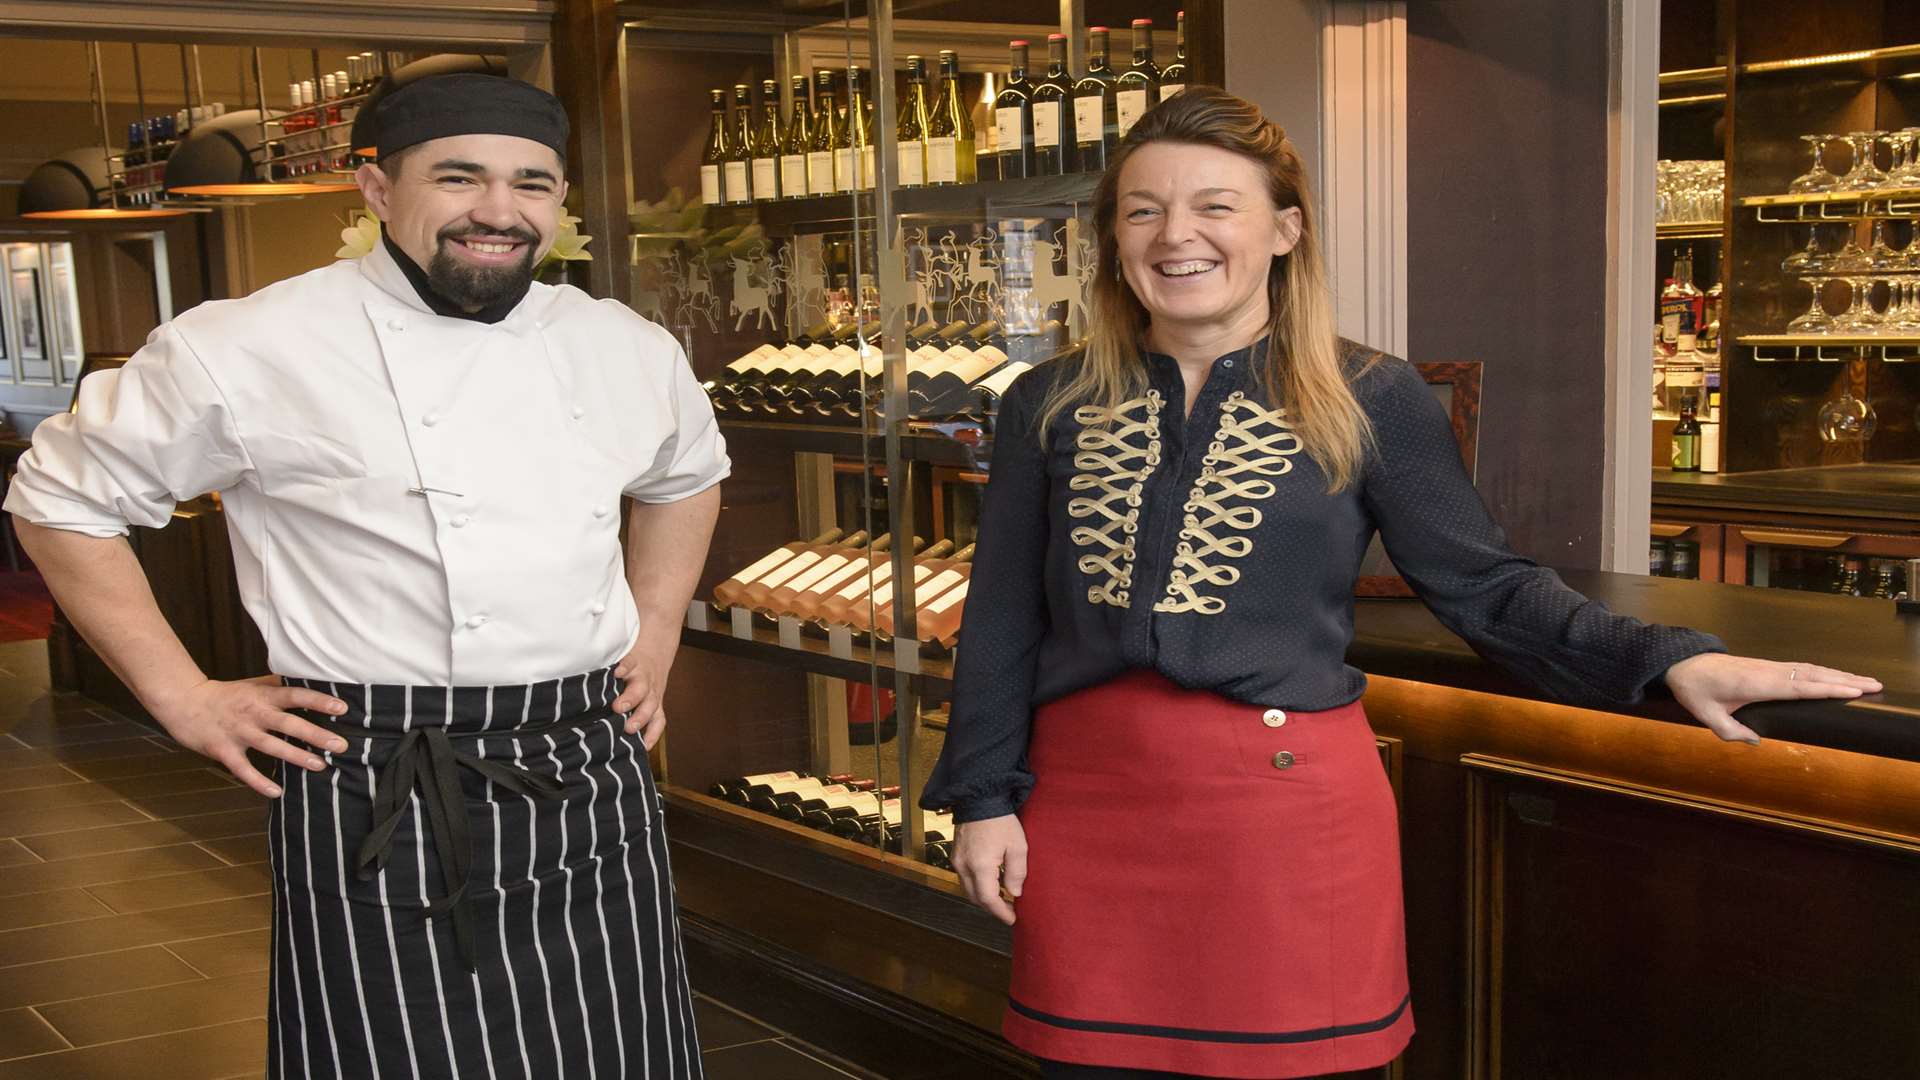 Head chef Norbert Molnar and Linda Willis, manager at the new Miller and Carter steakhouse.